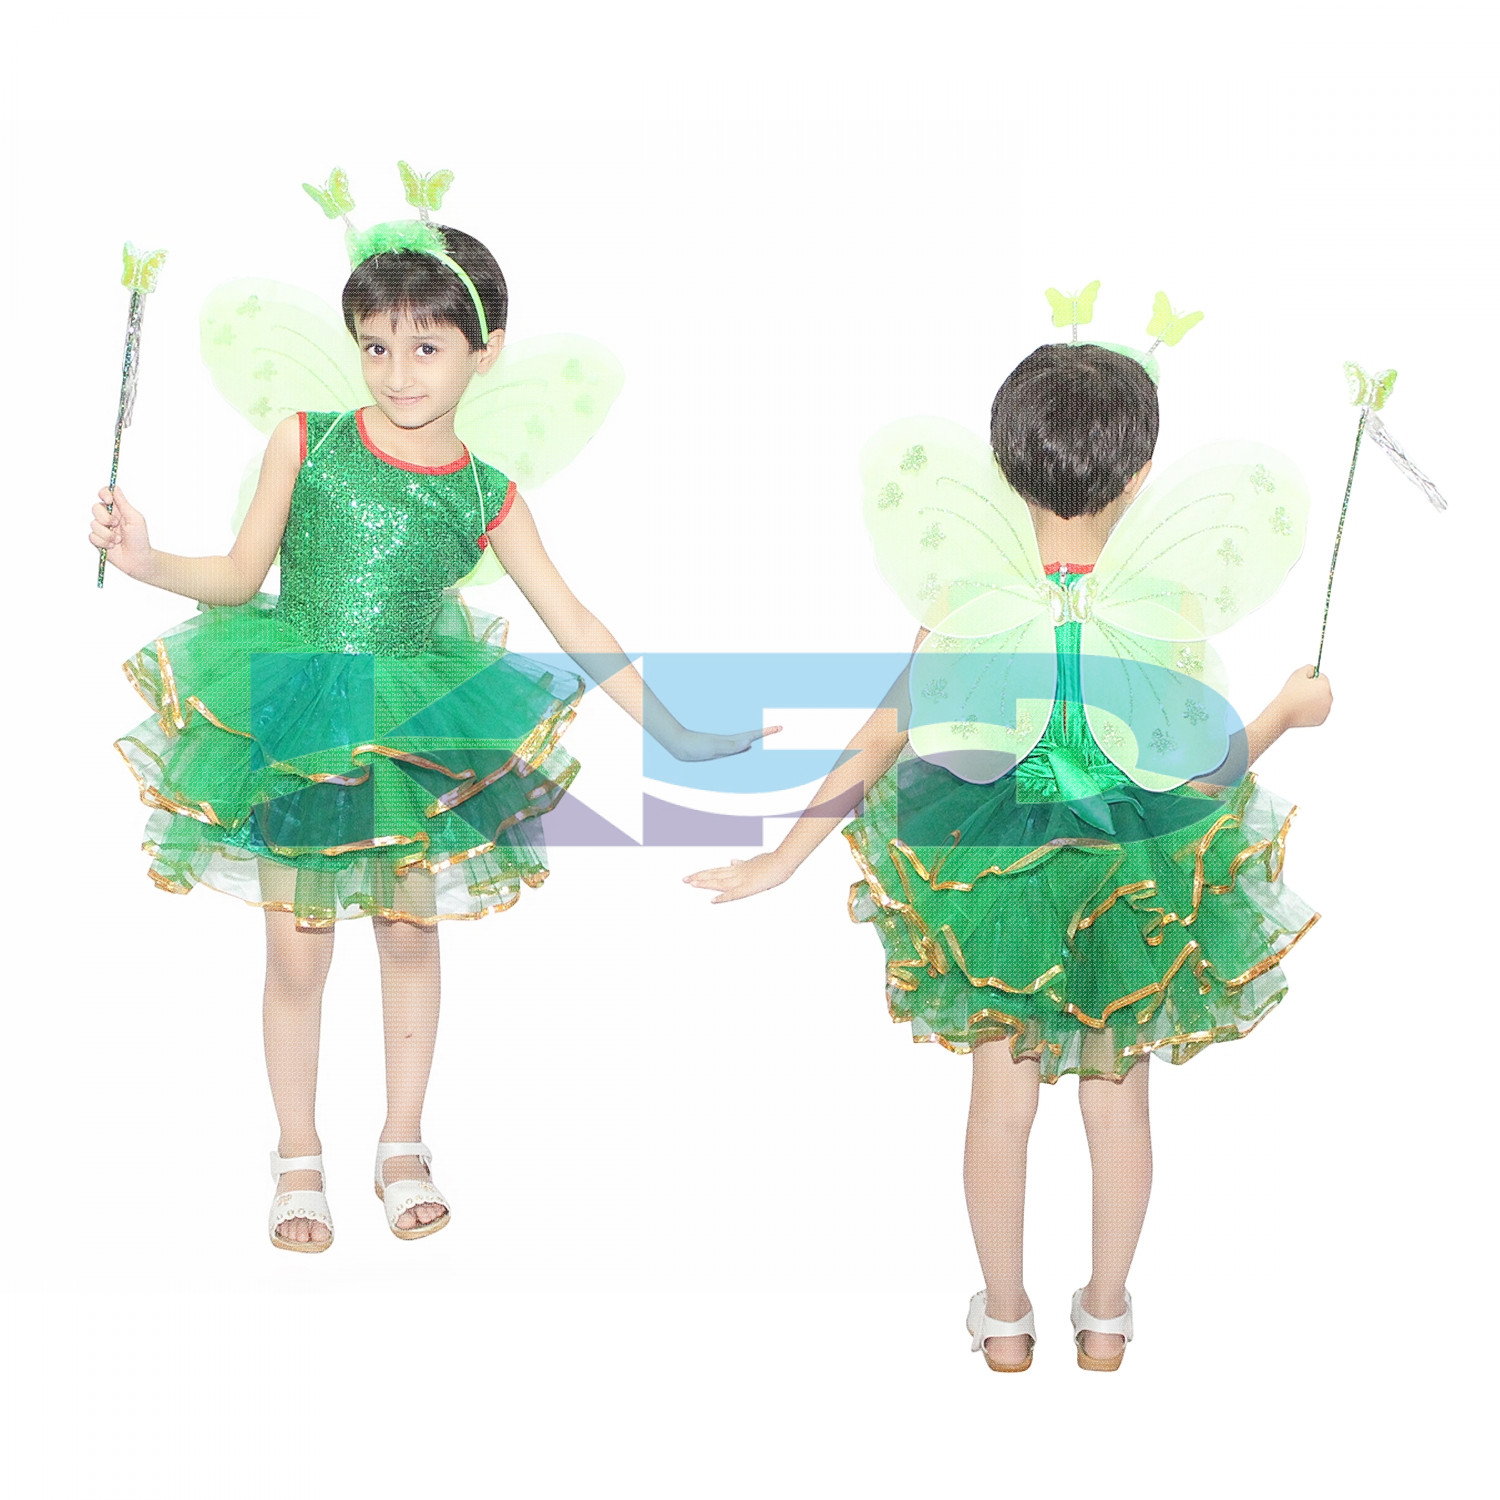 Tinkel Bell Fancy Dress/Fairy Tale Floral Costume/Halloween Cosrume For Kids/For Kids Annual function/Theme Party/Competition/Stage Shows/Birthday Party Dress